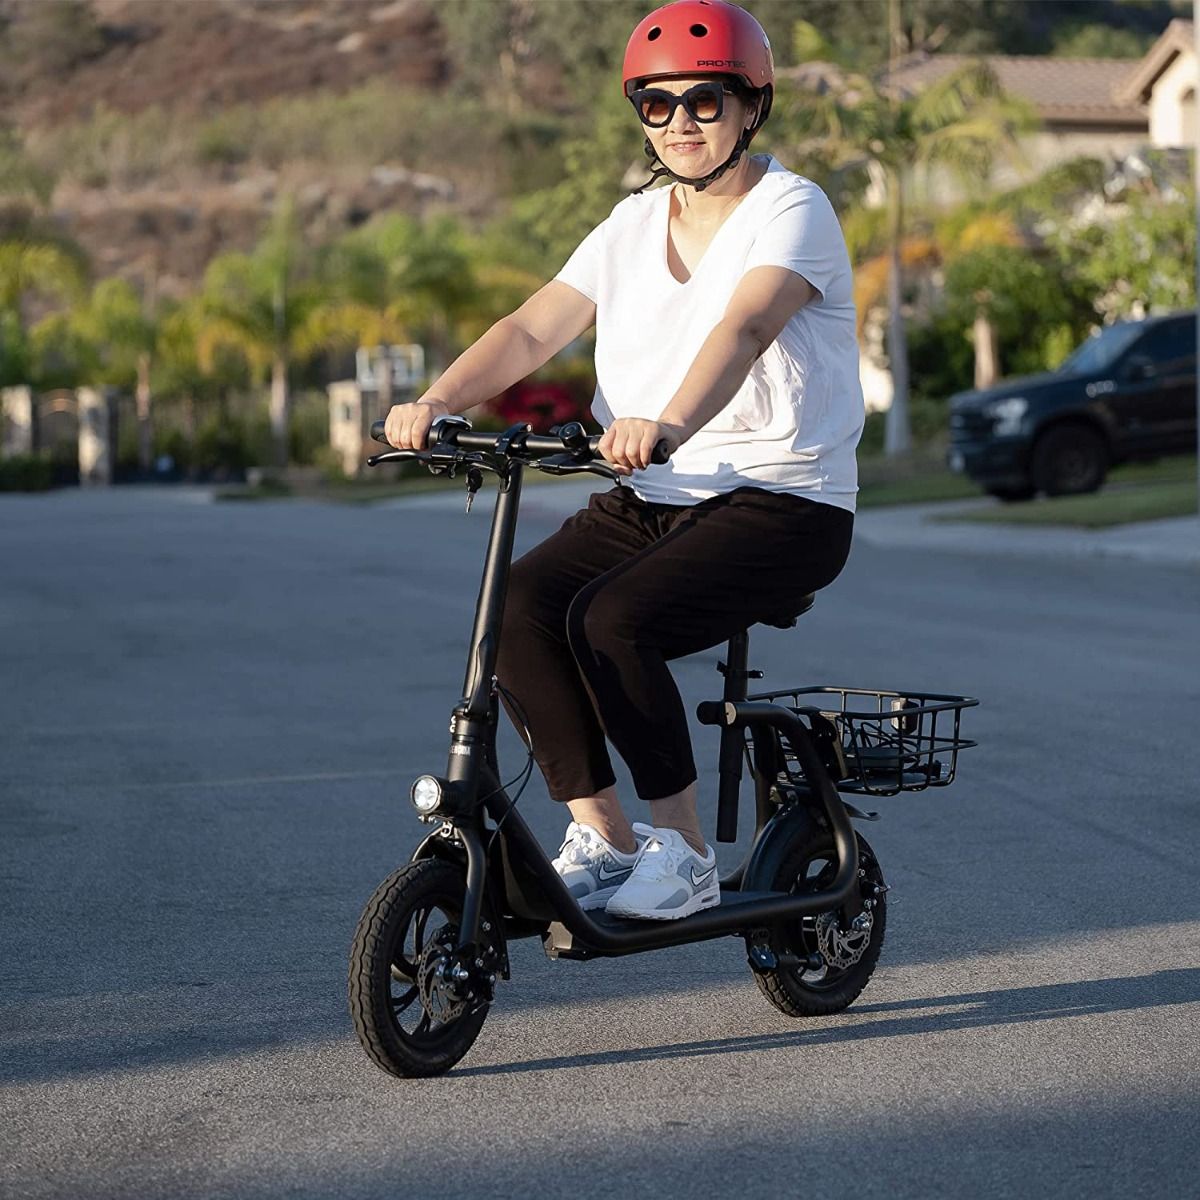 RED - Commuter Electric Scooter for Adults - Foldable Scooter with Seat & Carry Basket